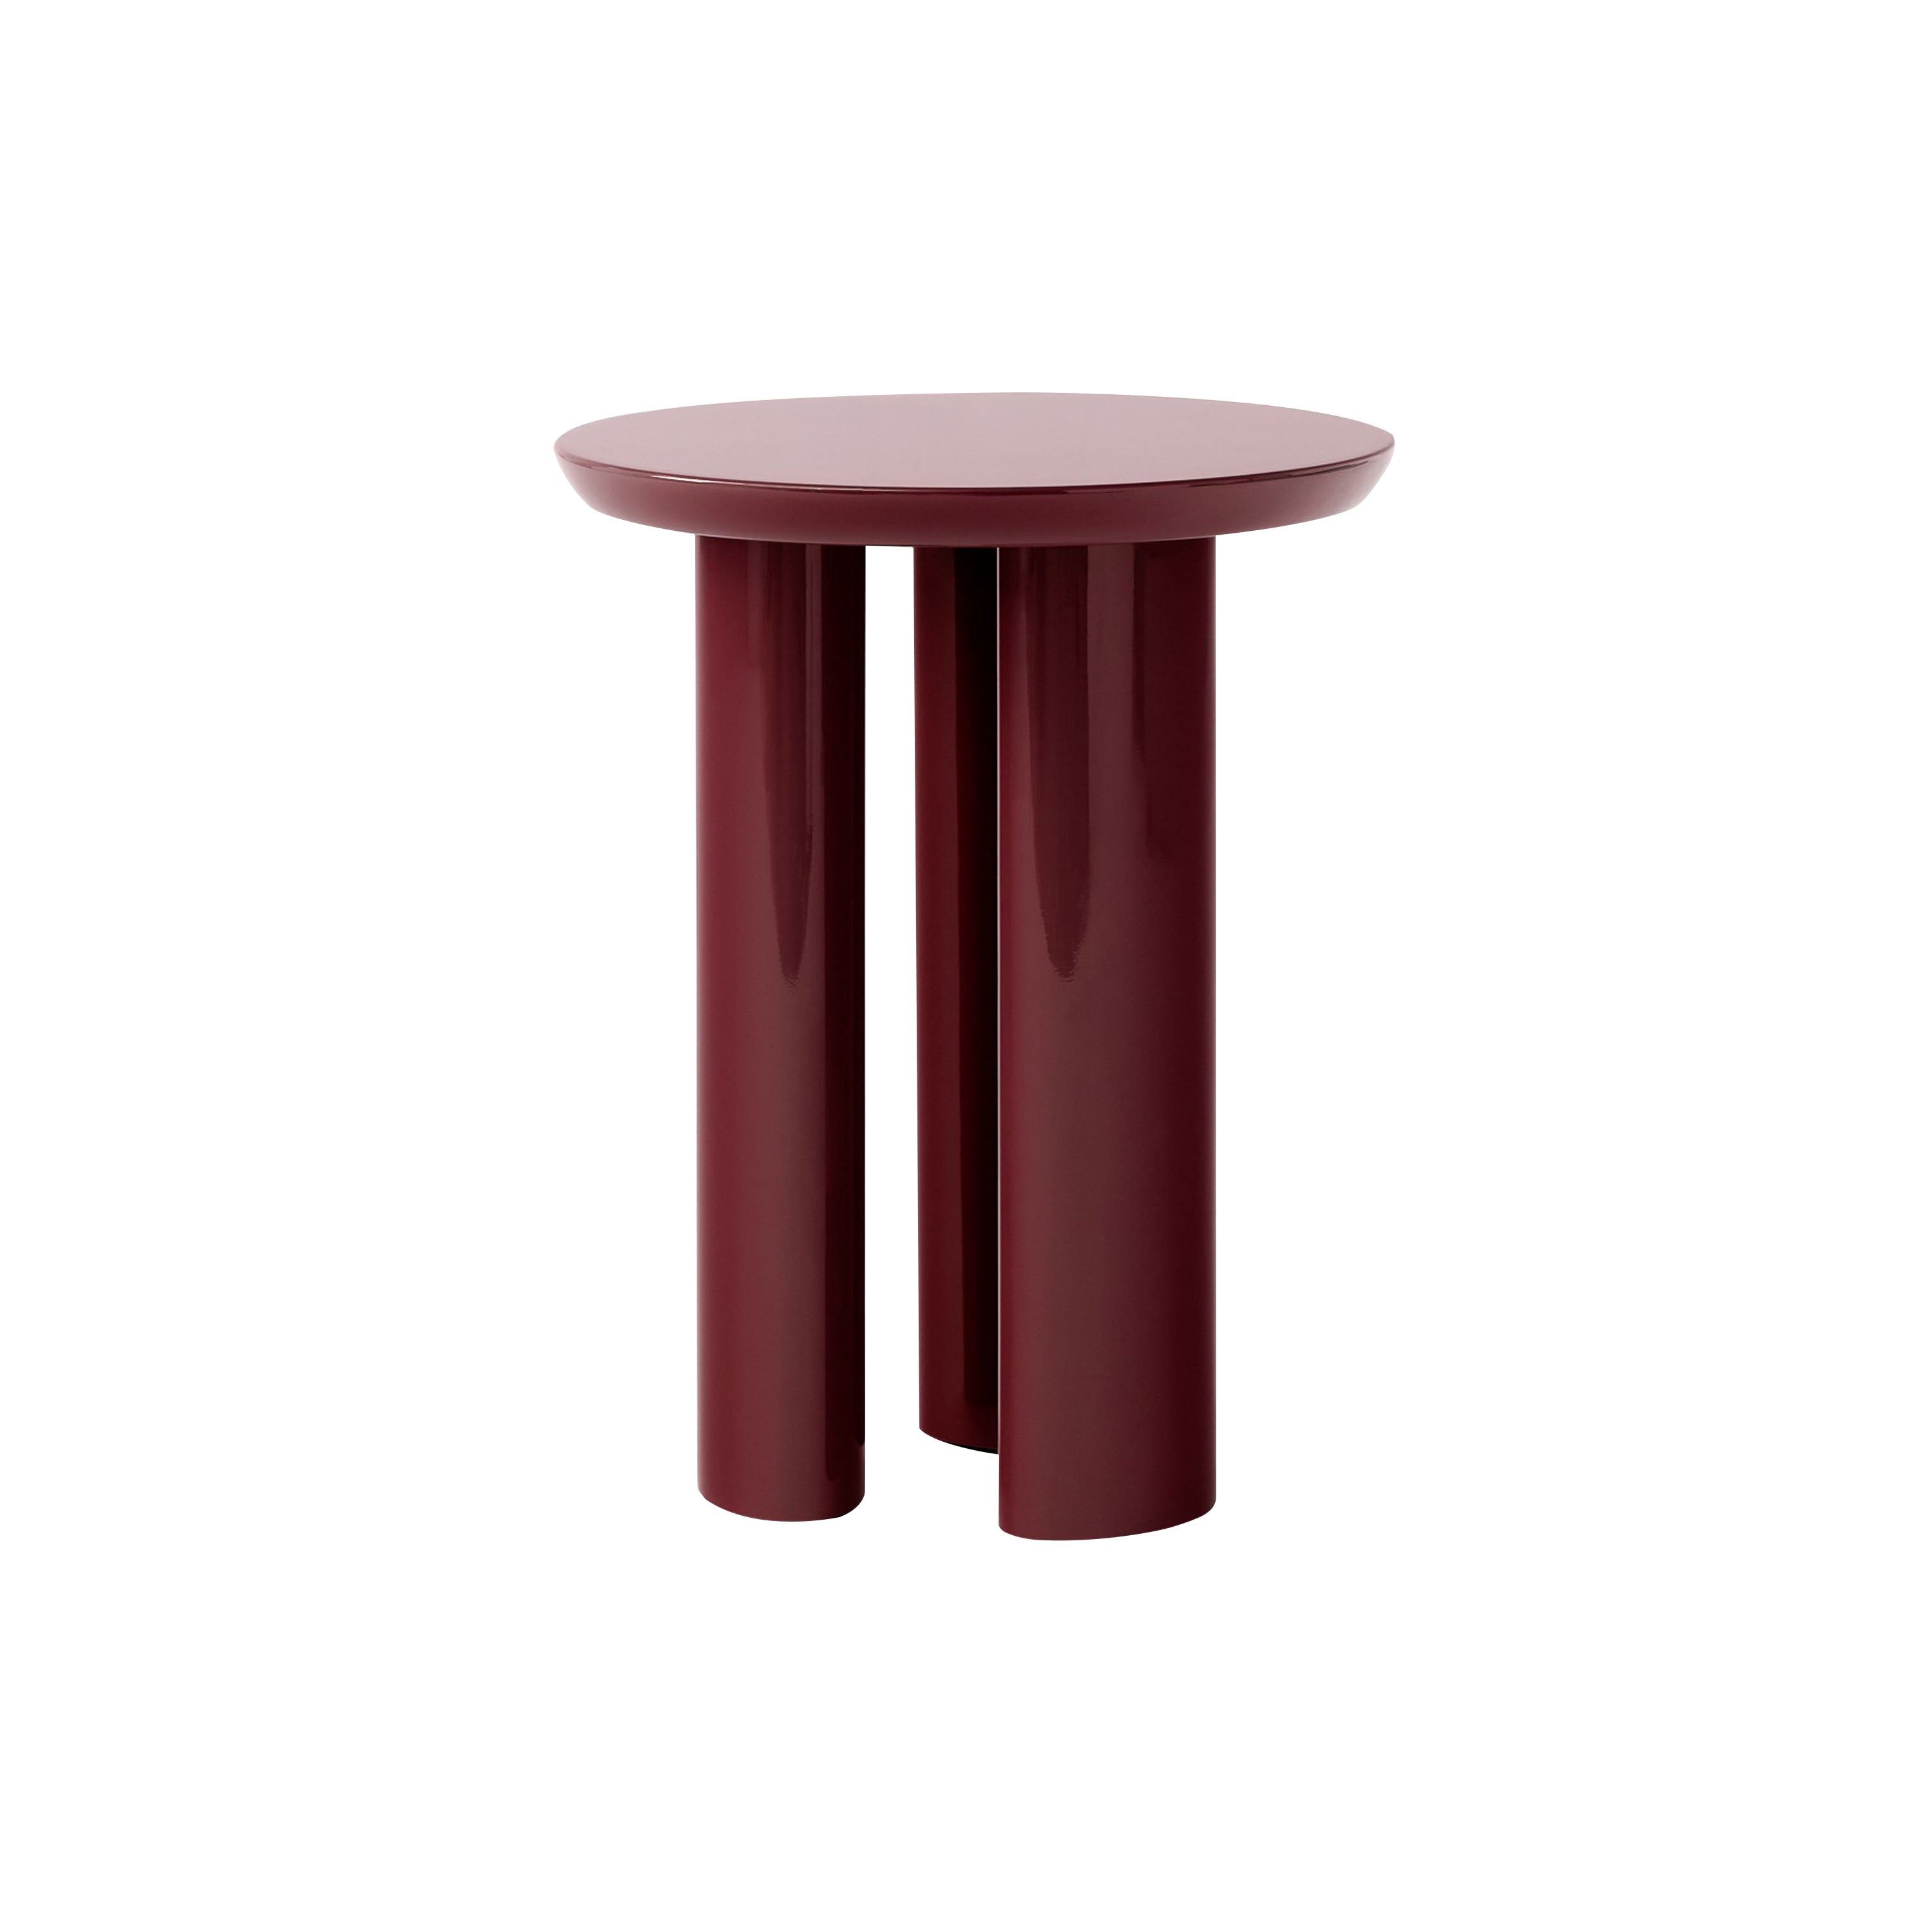 Tung Side Table JA3 : Burgundy Red